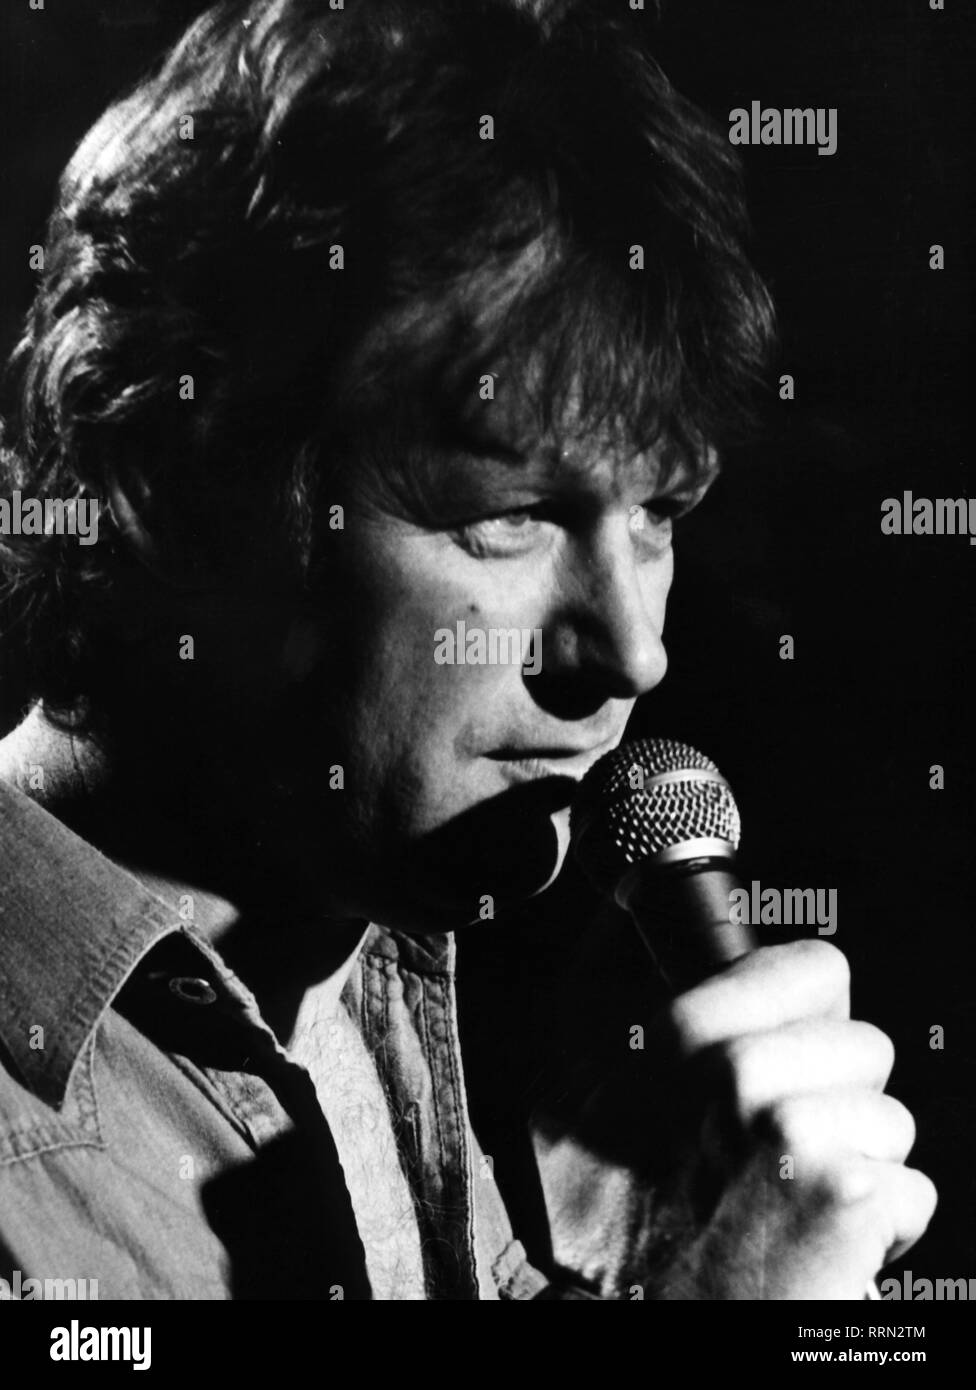 Gabriel, Gunter, * 11.6.1942, German singer (country), portrait, during stage performance, 1970s, Additional-Rights-Clearance-Info-Not-Available Stock Photo